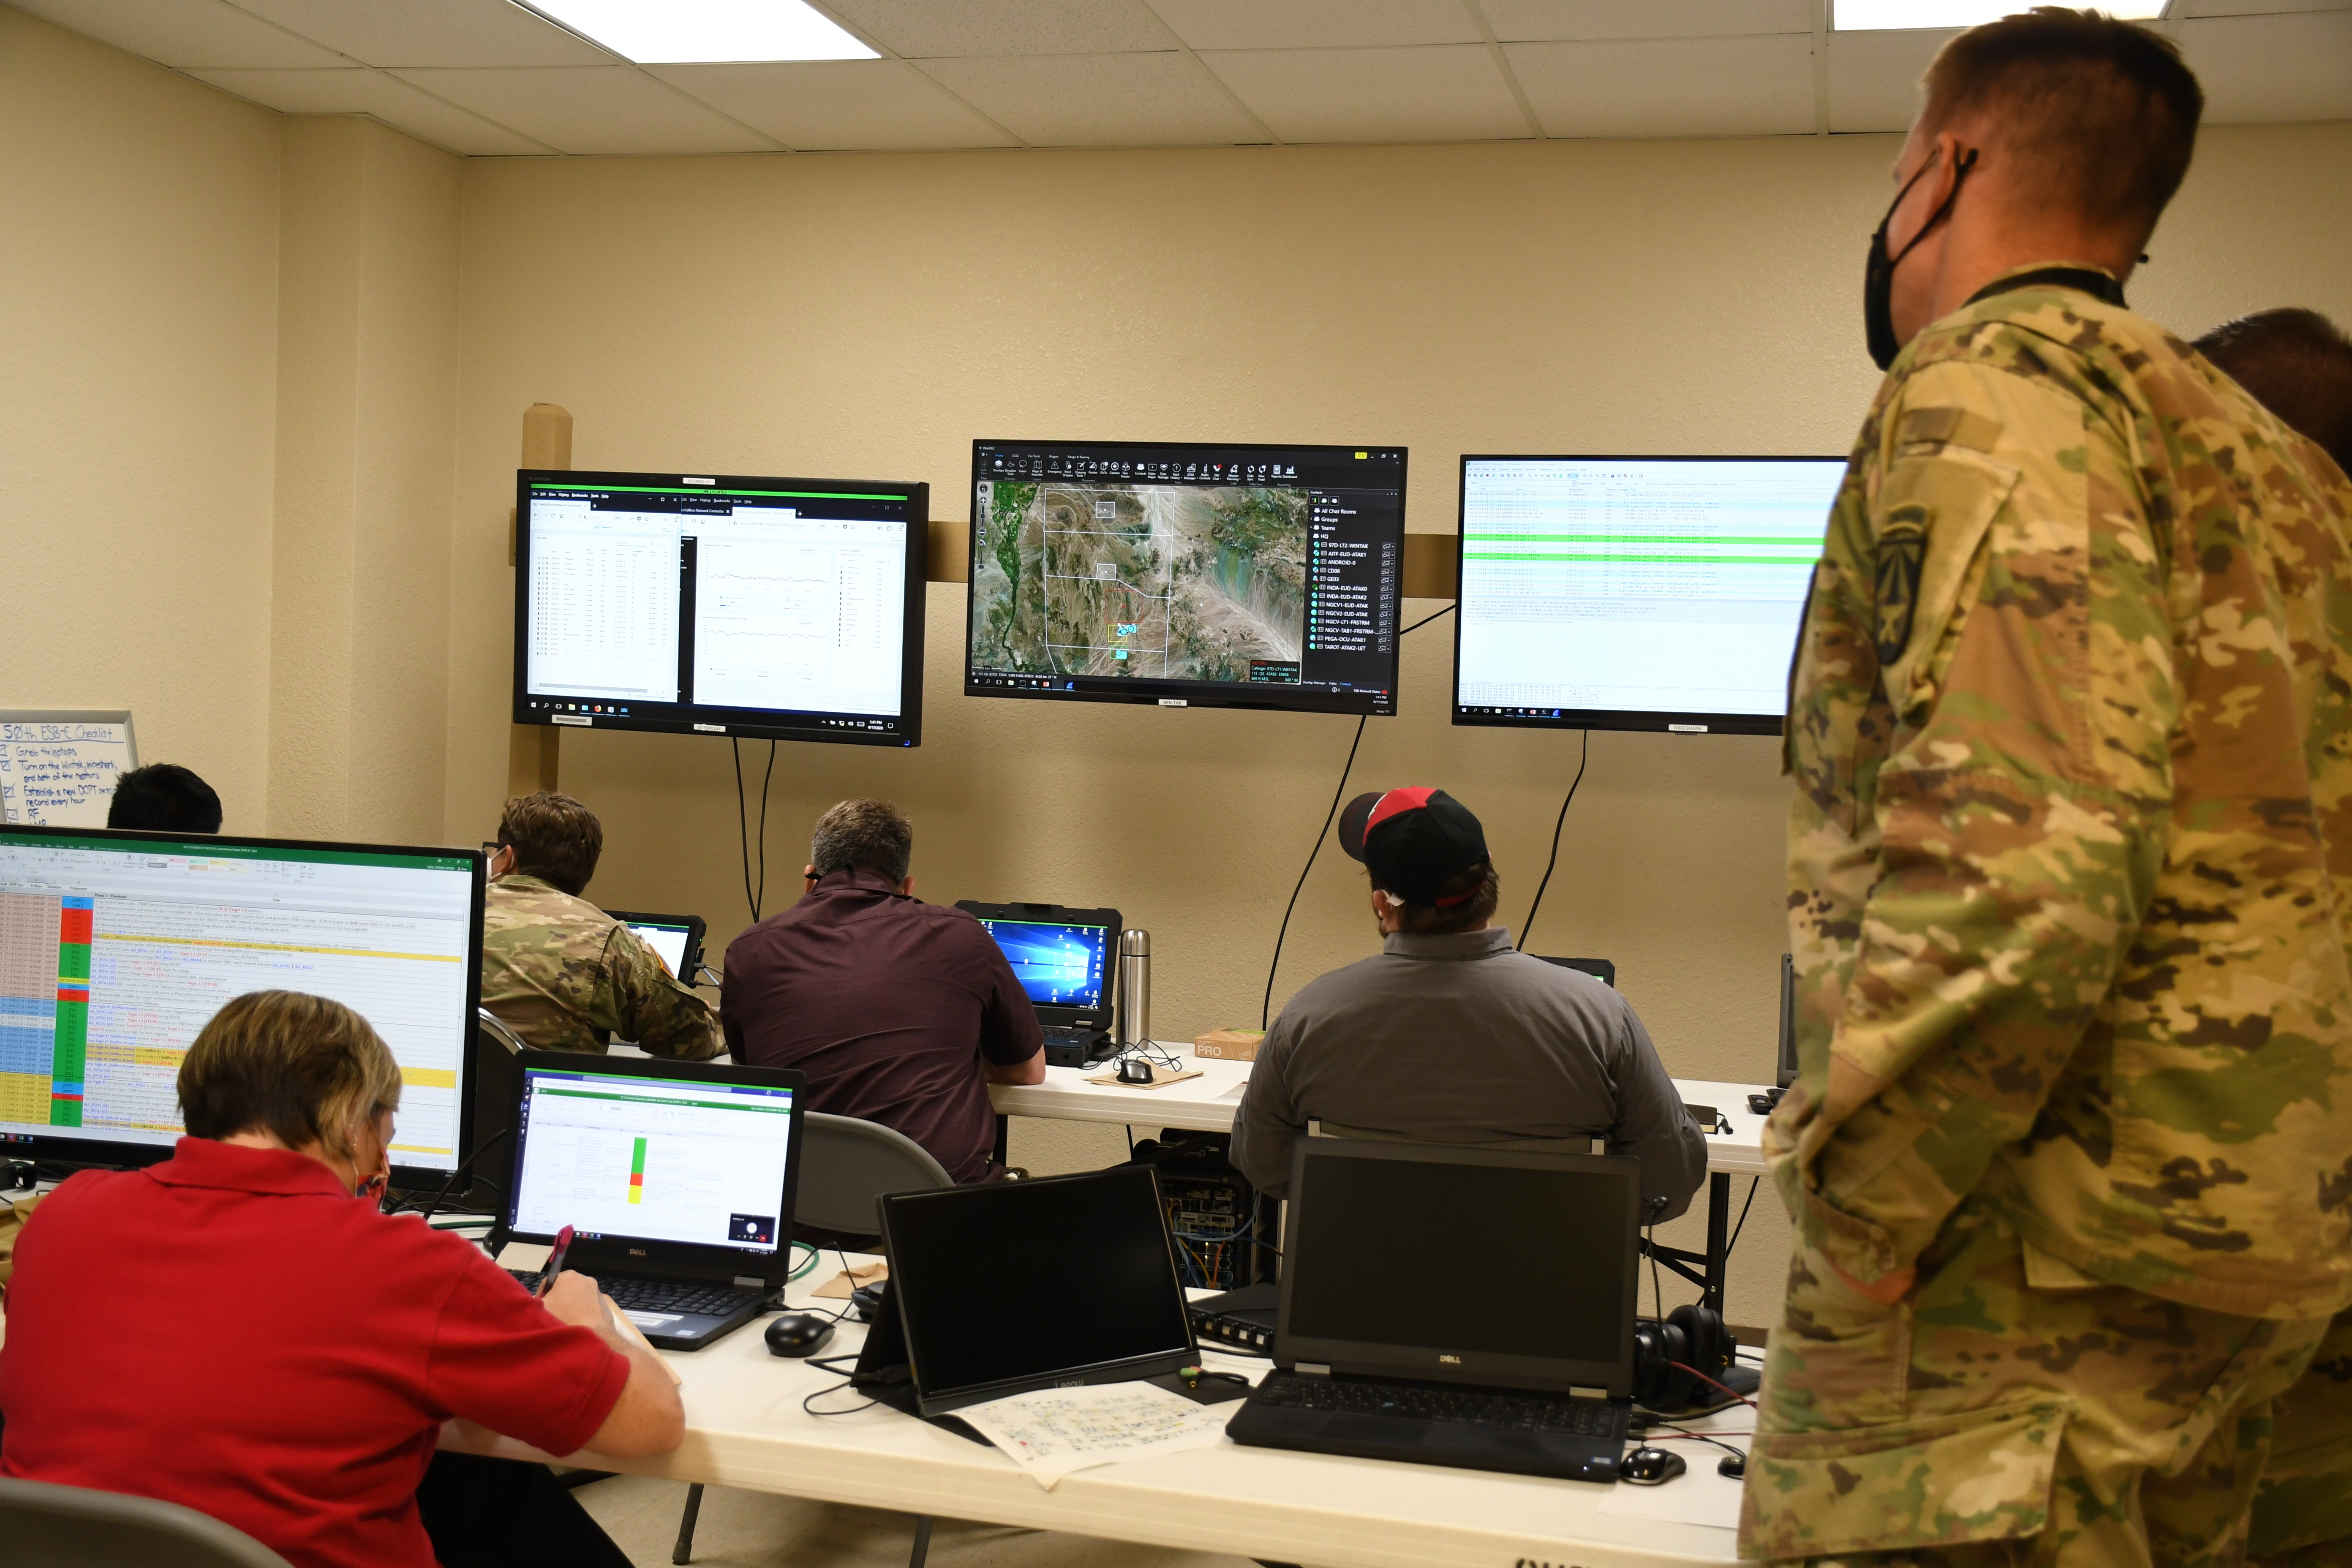 The Future of Warfighting: Cyber Enabling Convergence